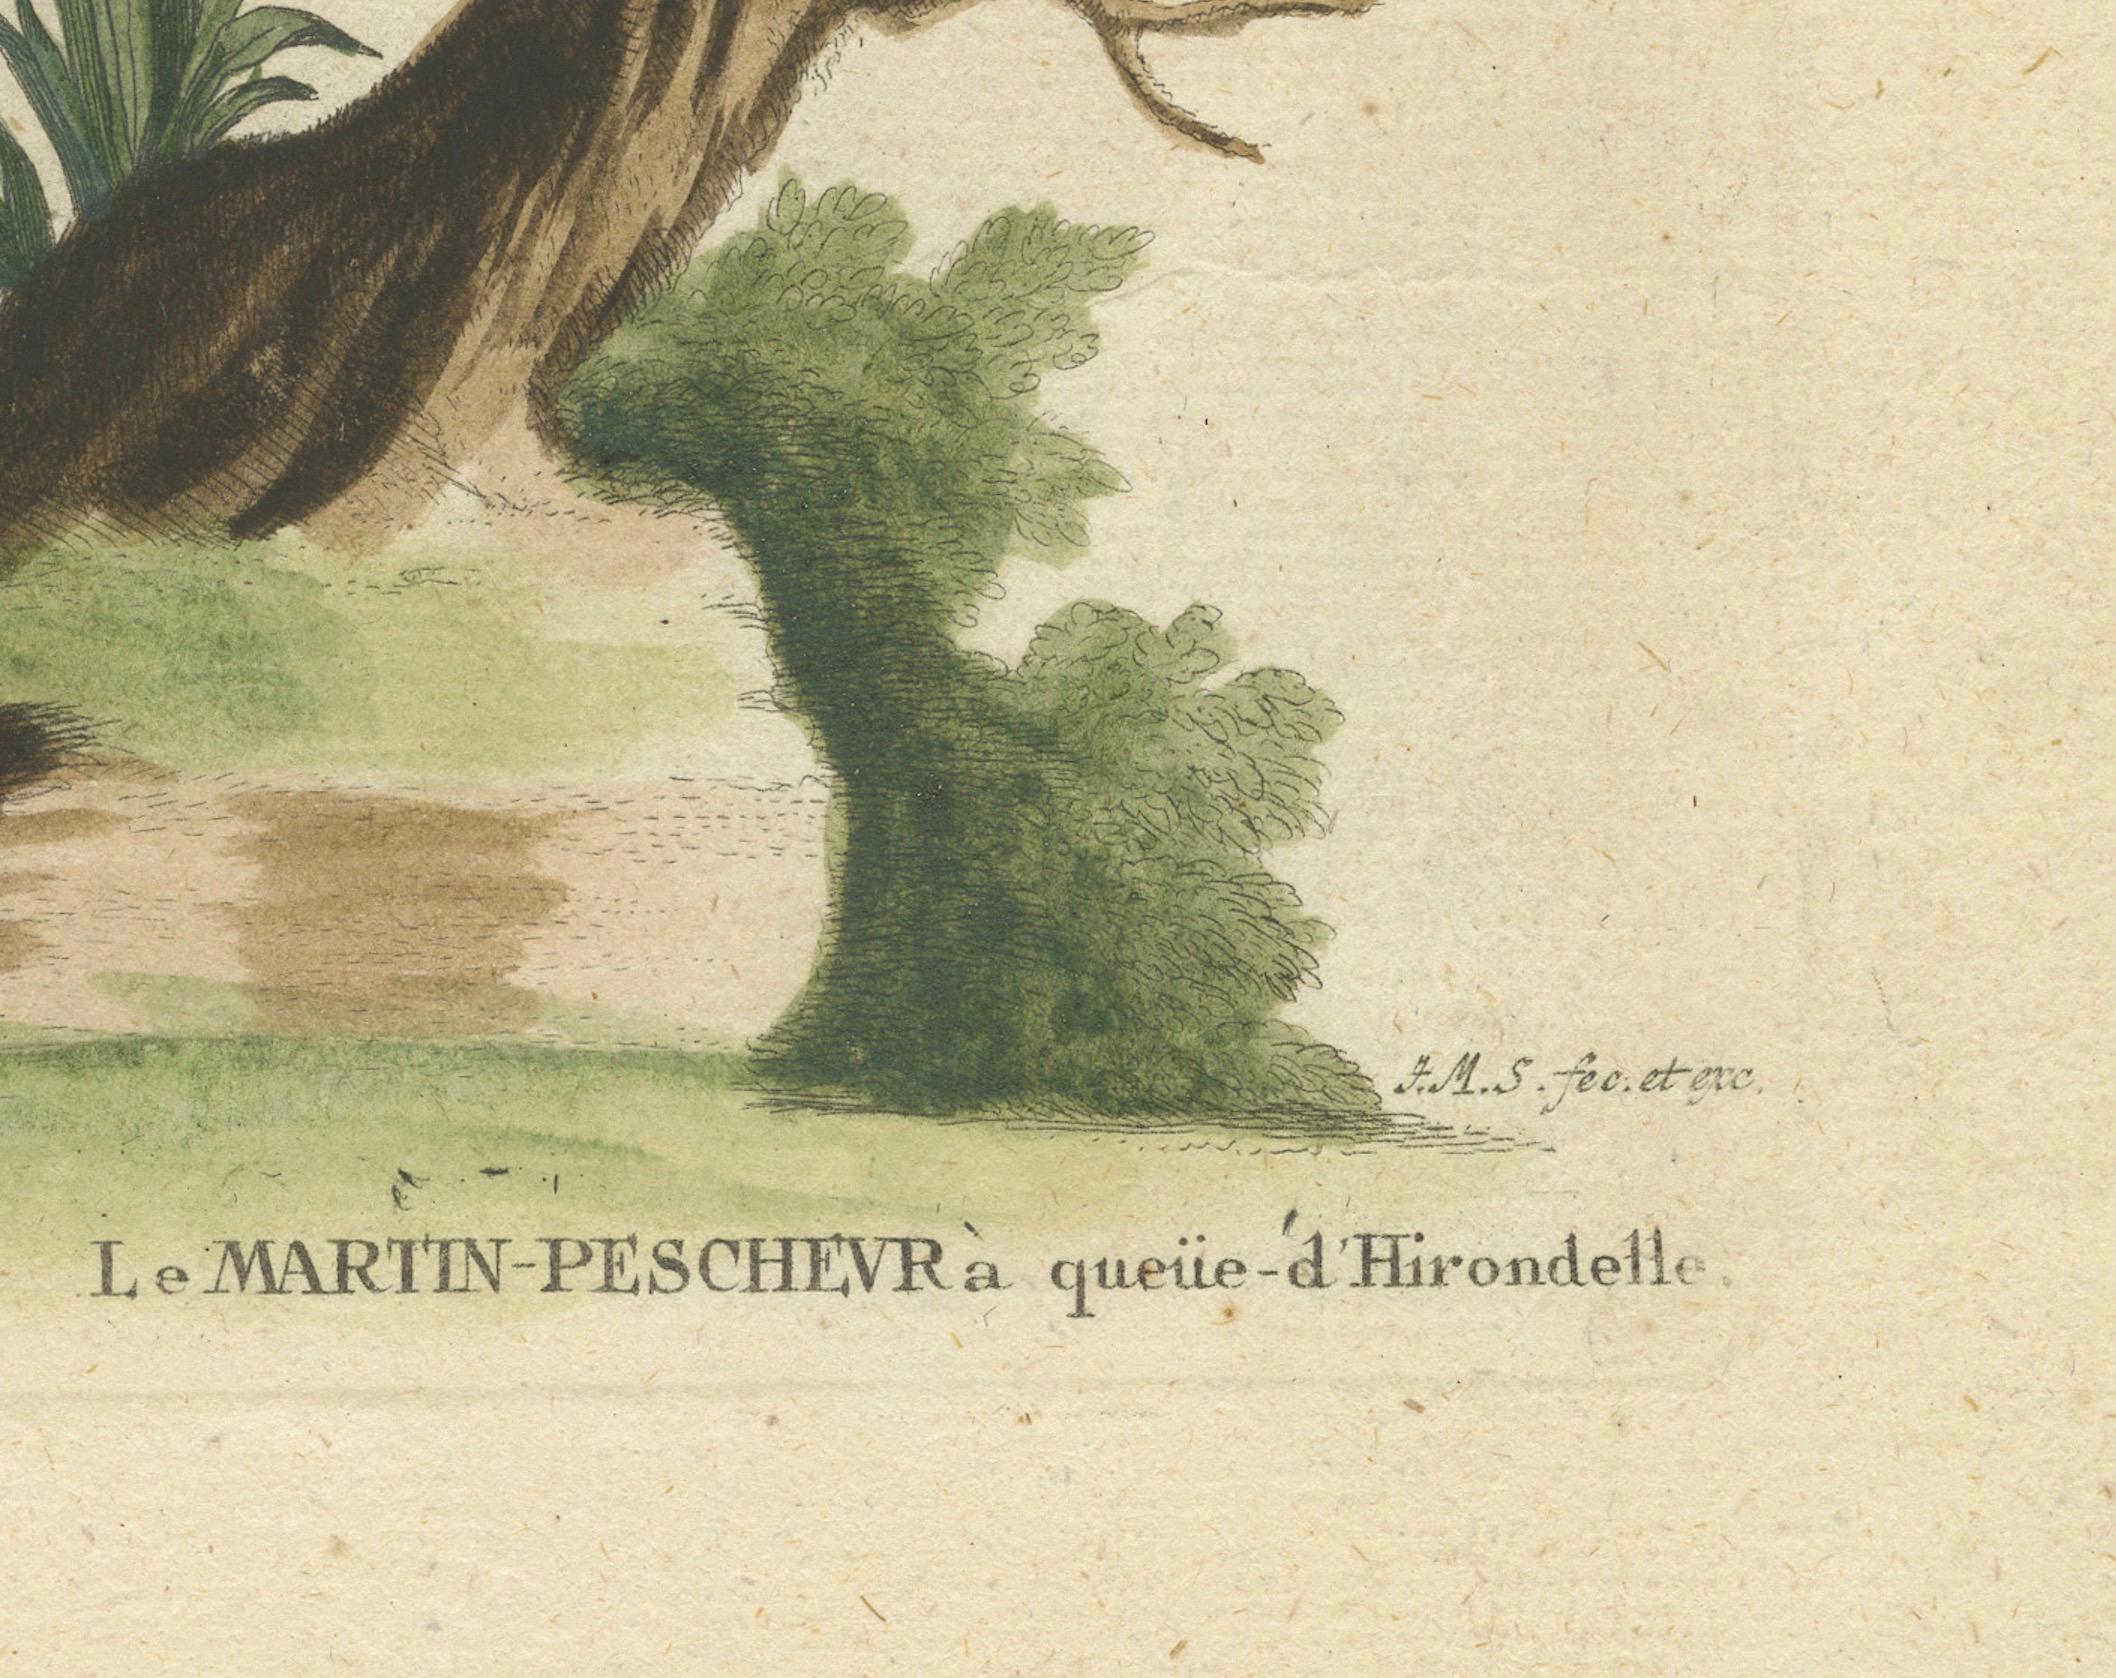 This engraving is from the Johann Michael Seligmann's collection, based on the works of George Edwards that was published in 1743. 

The text in the image is in both German and Latin, with a French name included as well, which was a common practice